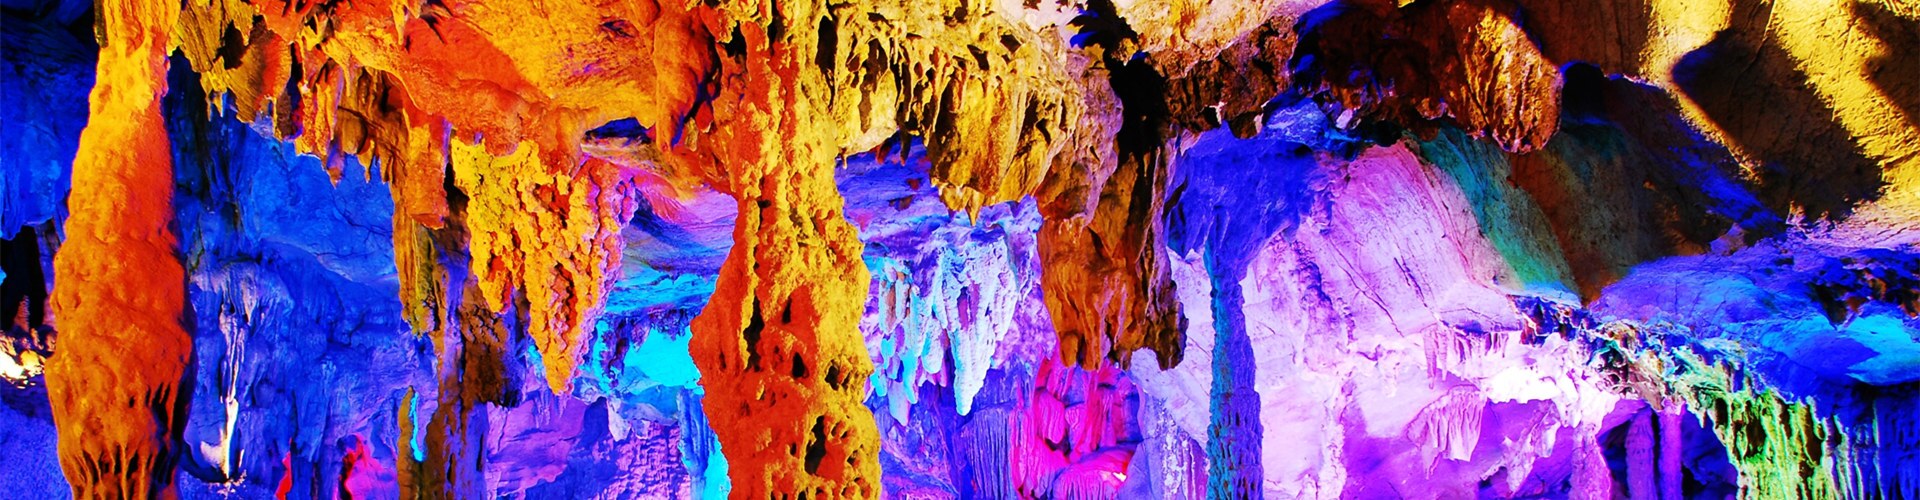 Reed Flute Cave - a Thousand-Year-Old Colorful Dream